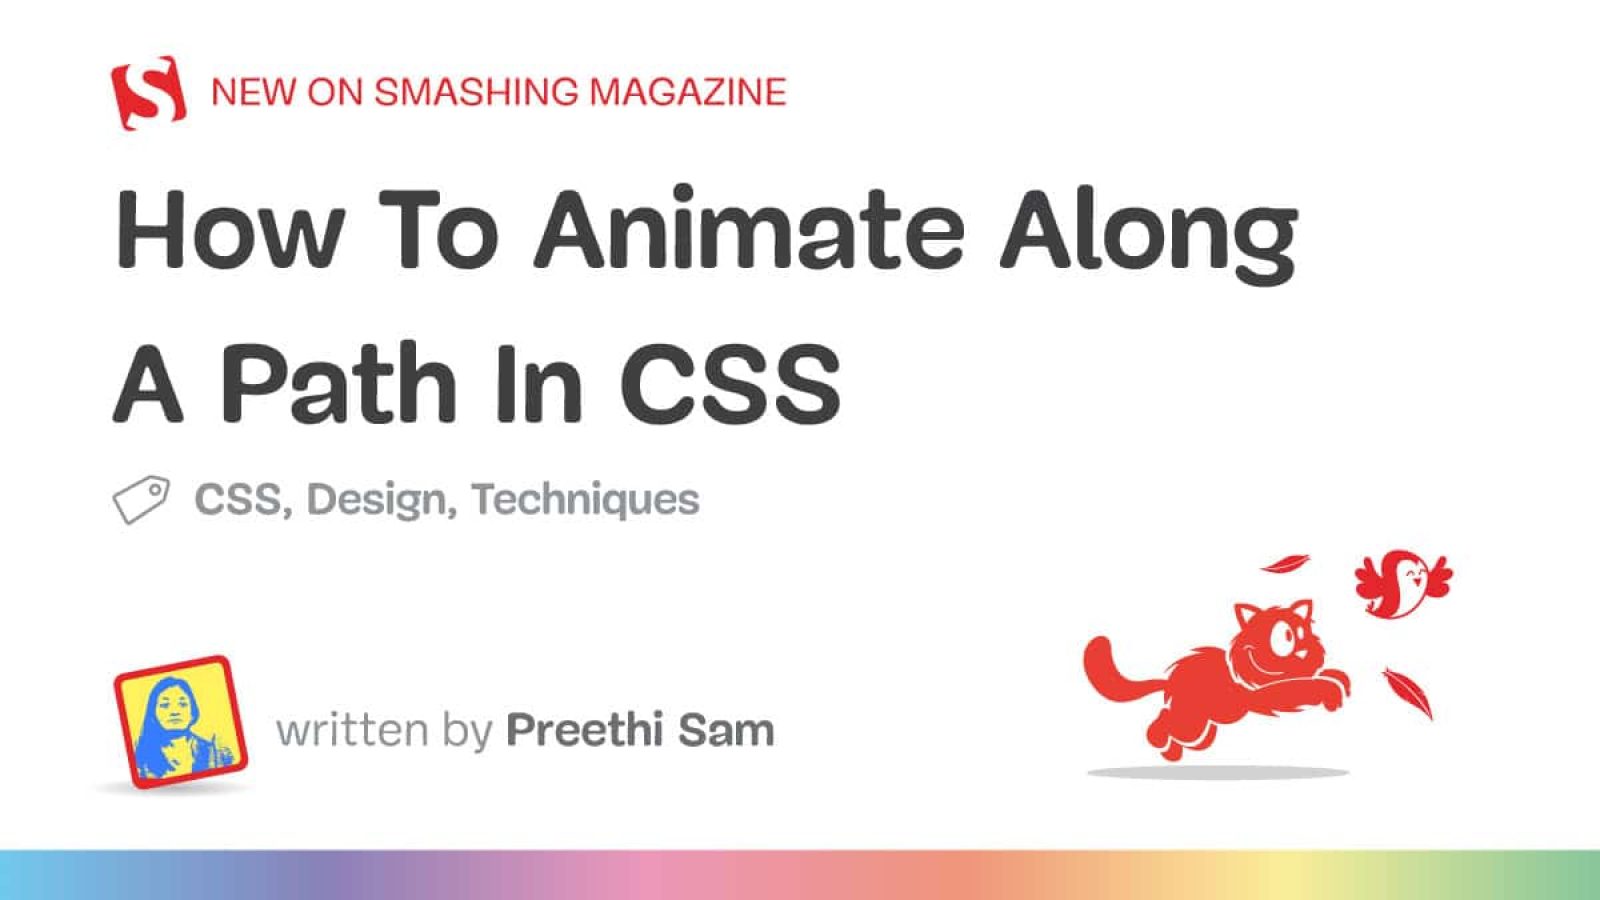 How To Animate Alongside A Path In CSS